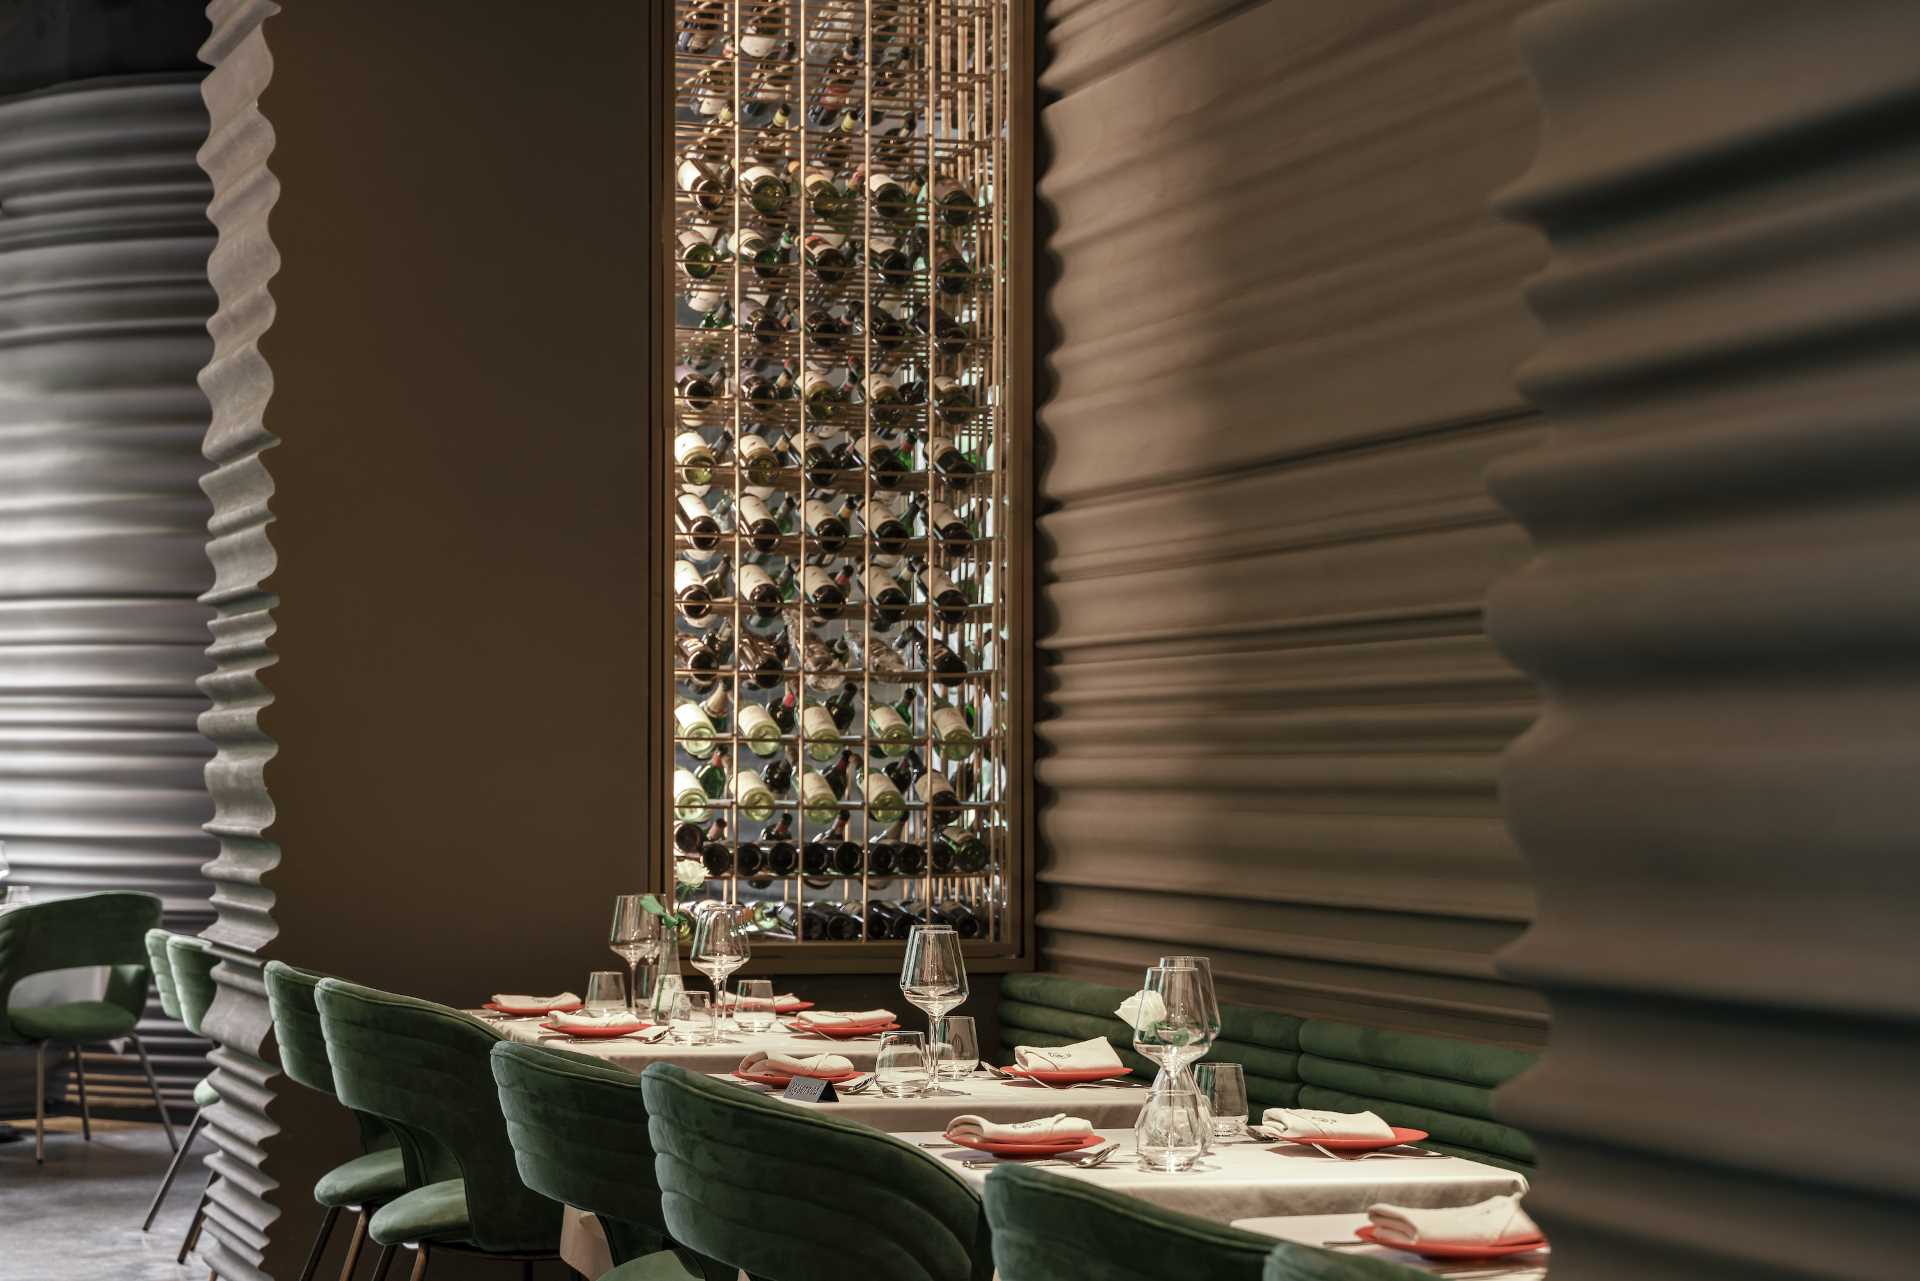 A modern restaurant with sculptural walls and built-in wine racks.